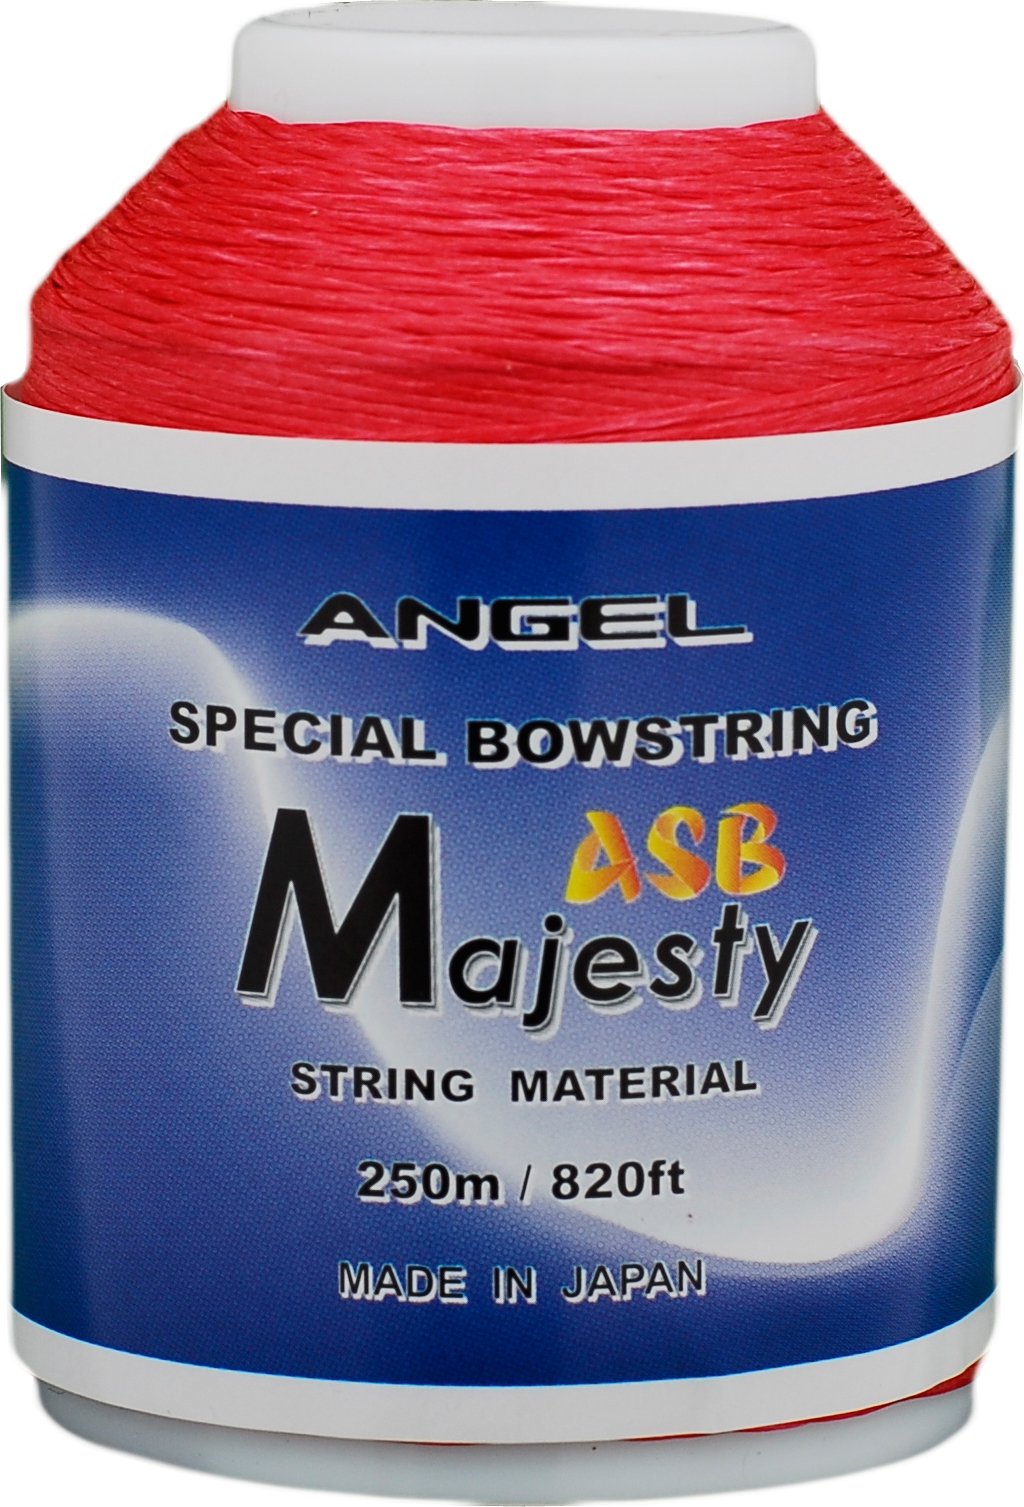 ANGEL MAJESTY BLACK BCY BOWSTRING SERVING 